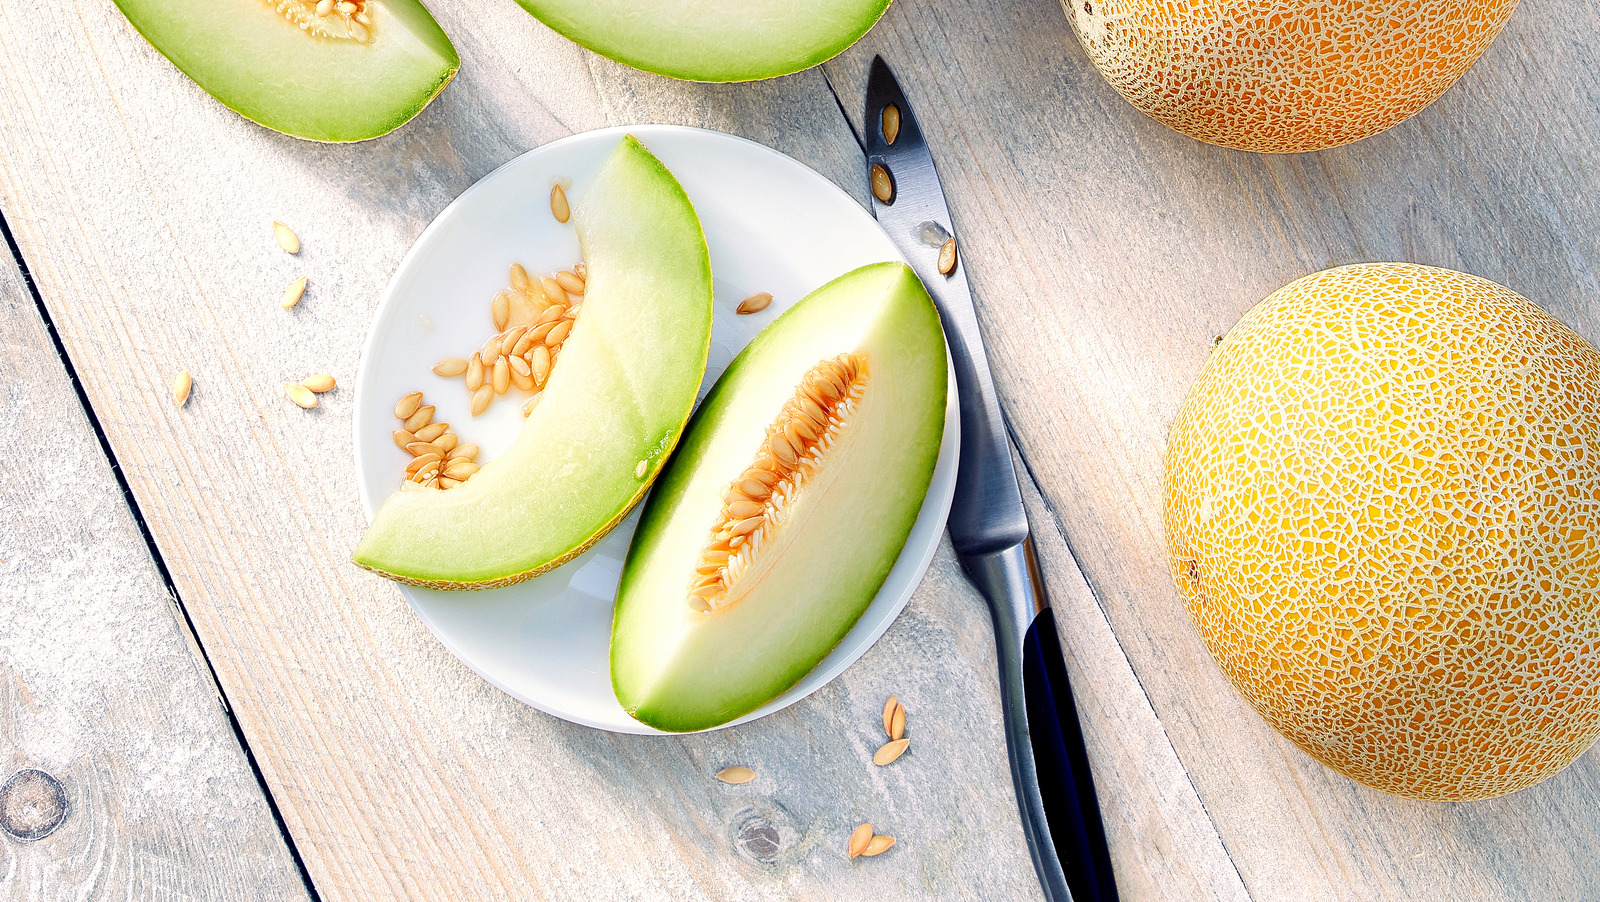 What Makes Honeydew Different From Cantaloupe?